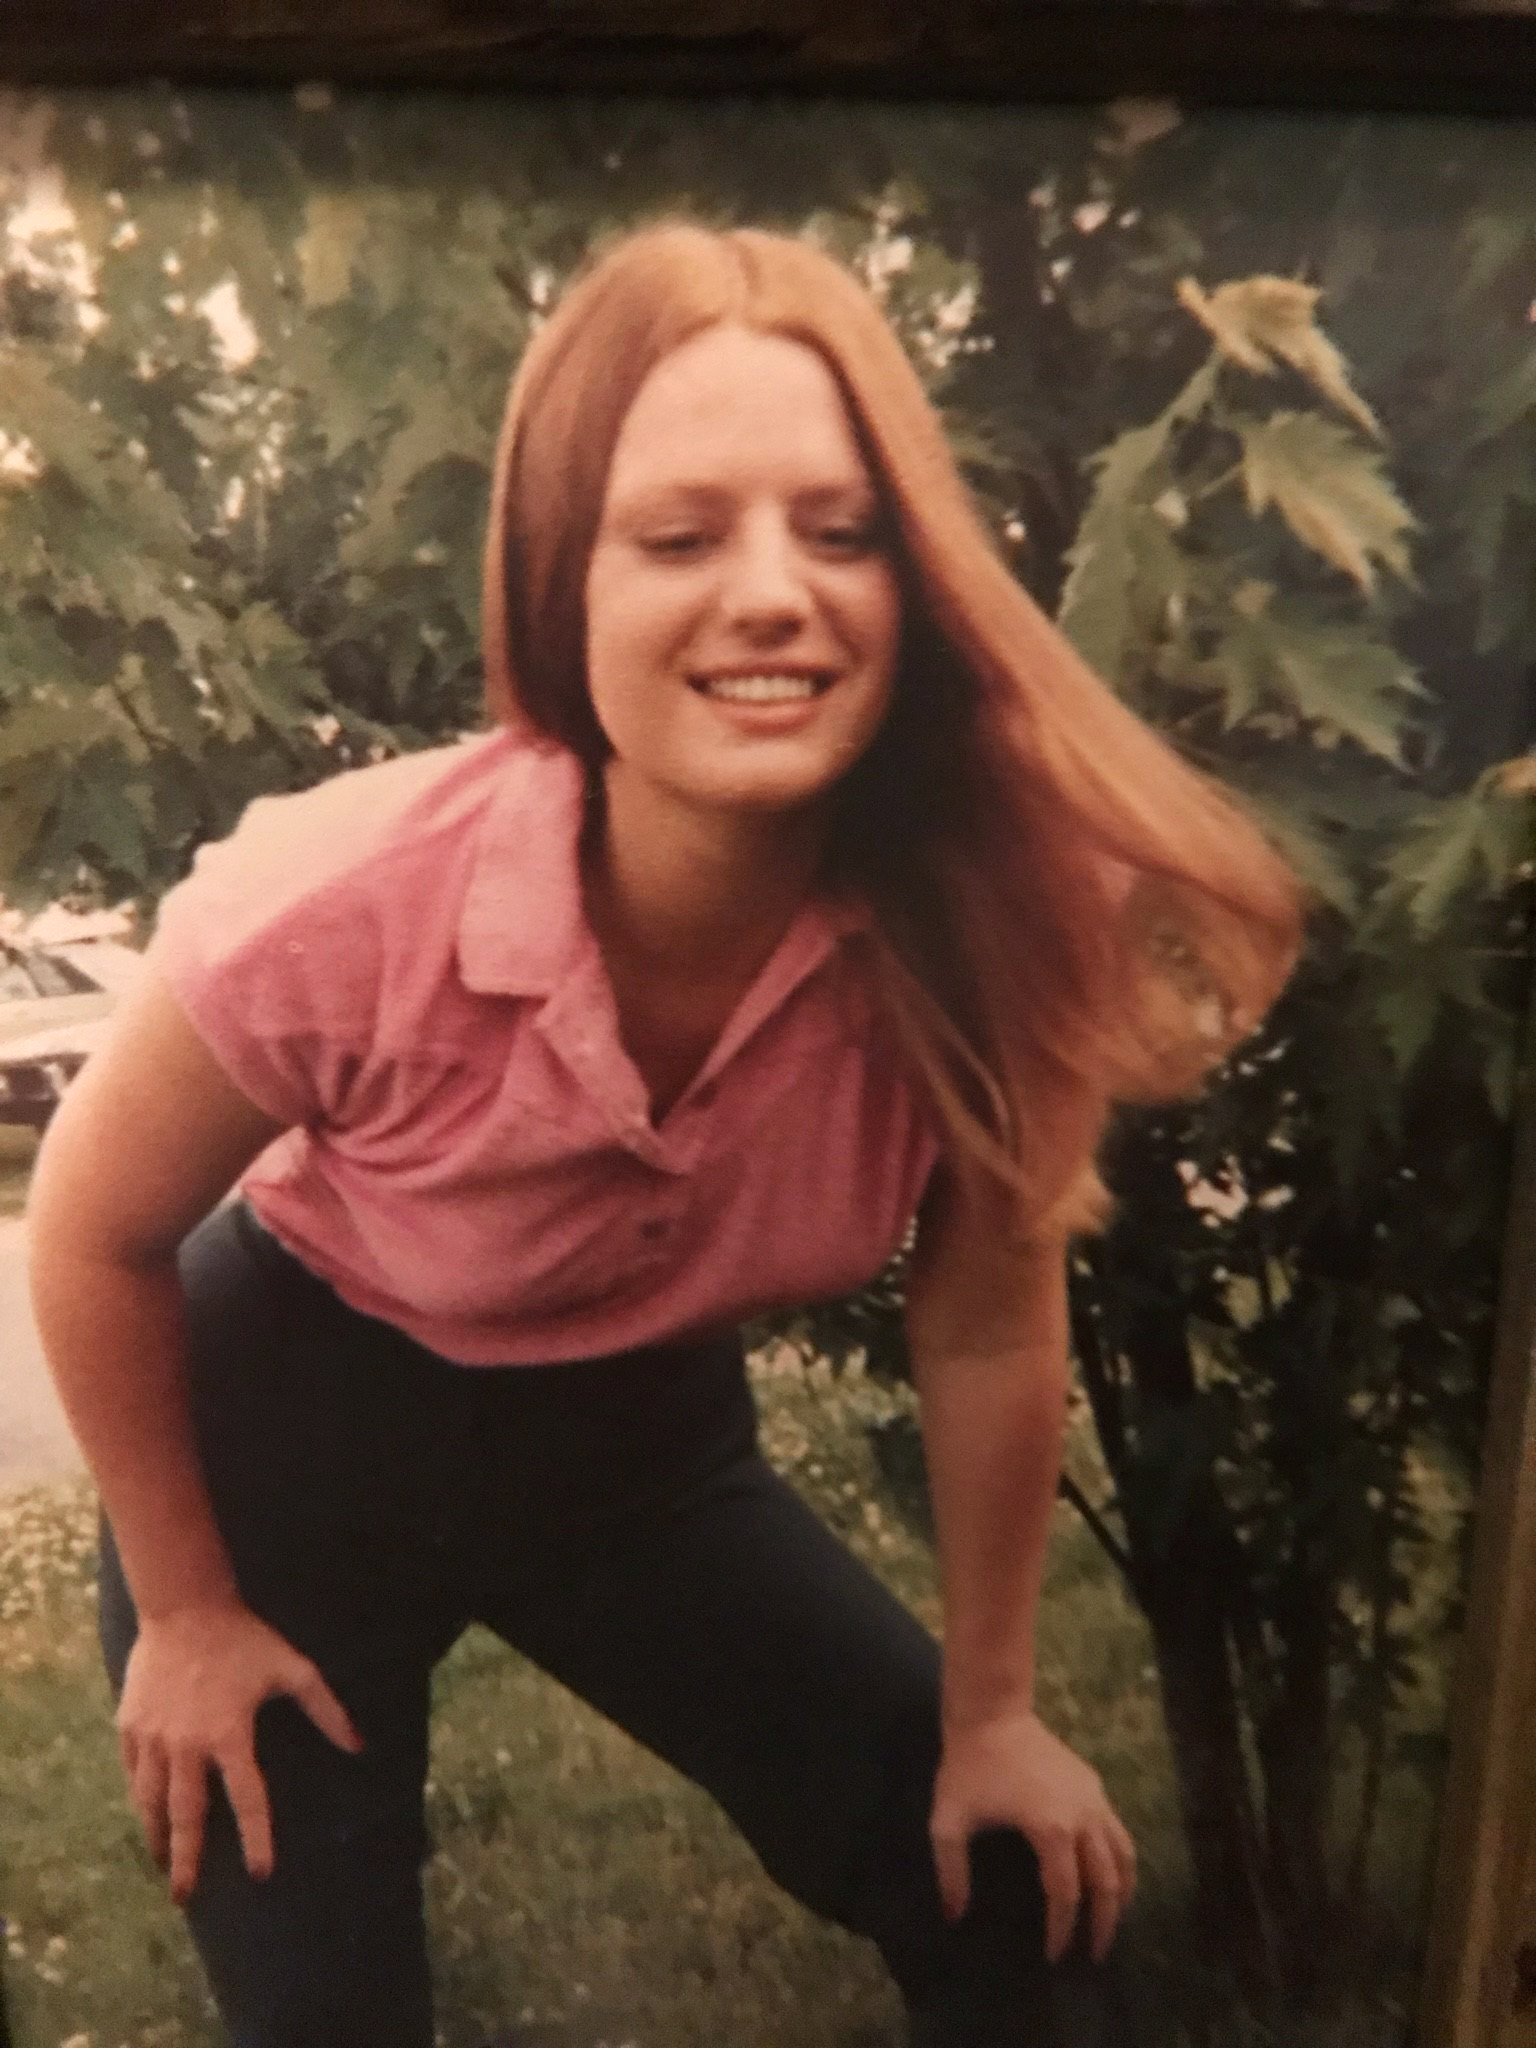 PHOTO: A woman who's body was found in Ohio on April 24, 1981, and became known as the "Buckskin Girl" because of the buckskin jacket she was wearing, has finally been identified by authorities as Marcia L. King of Arkansas.